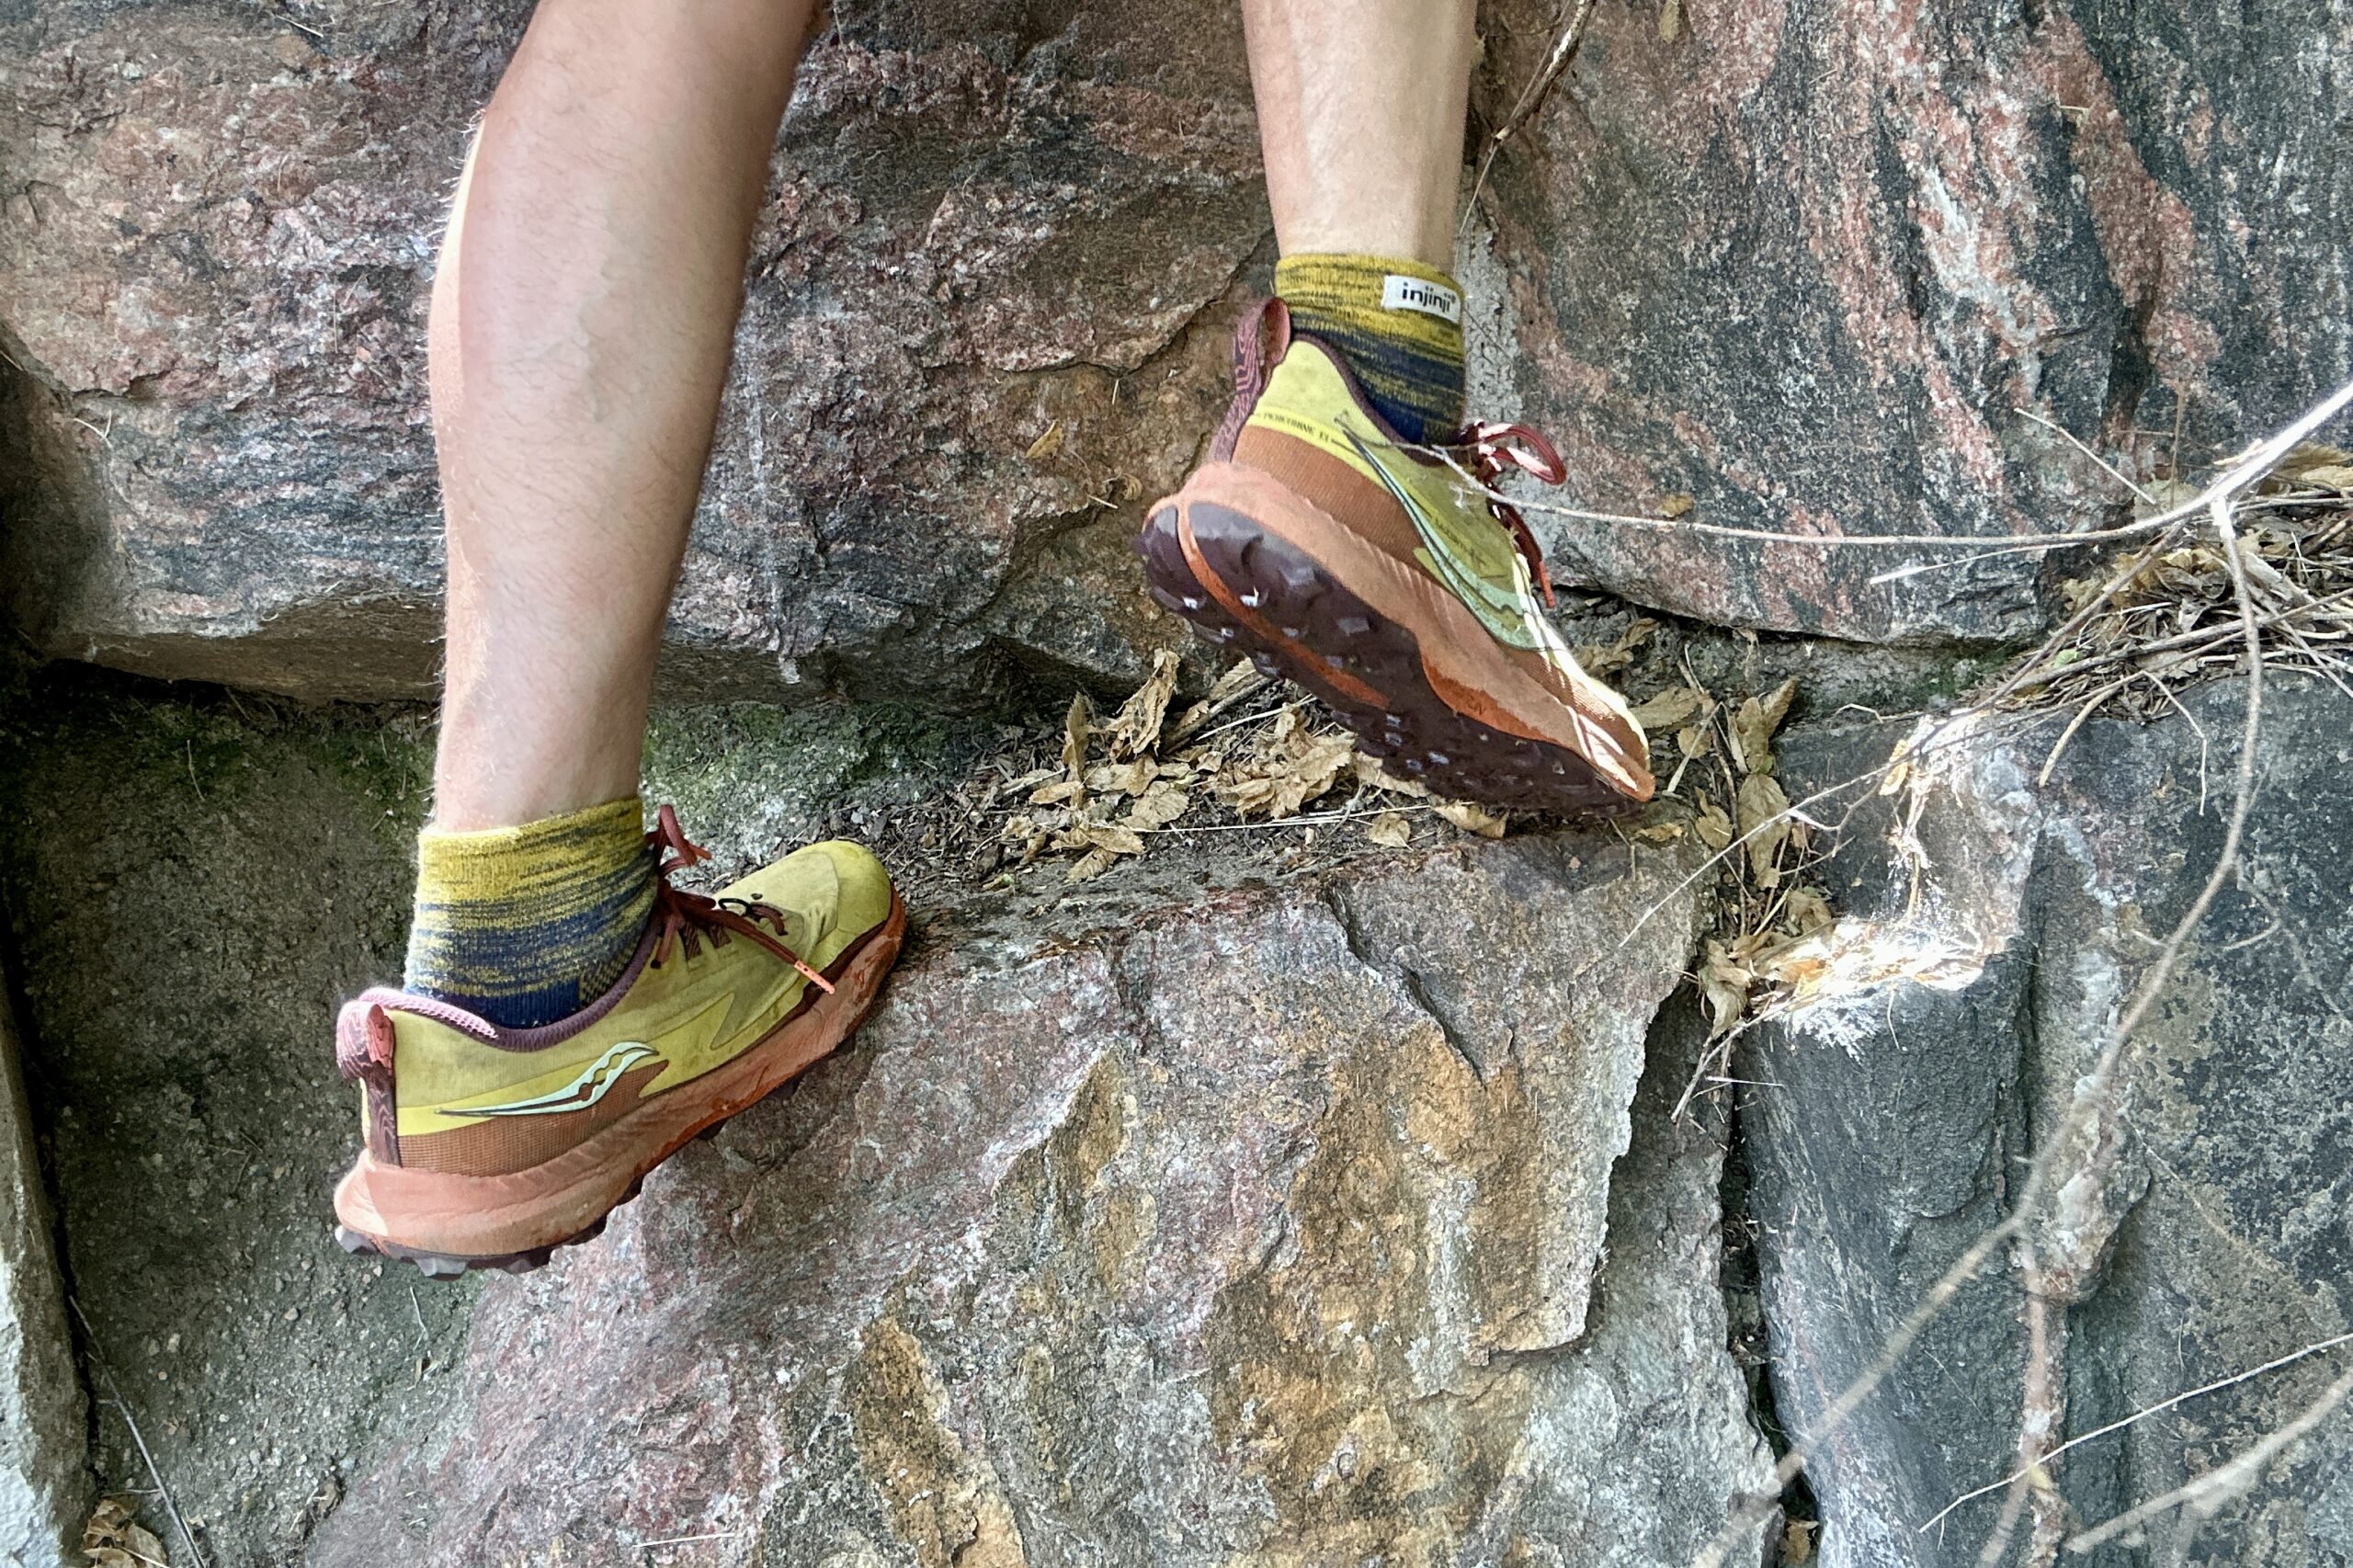 Man's legs from knee down wearing yellow and black socks with Saucony Peregrine 14 running shoes climbs some rocks.